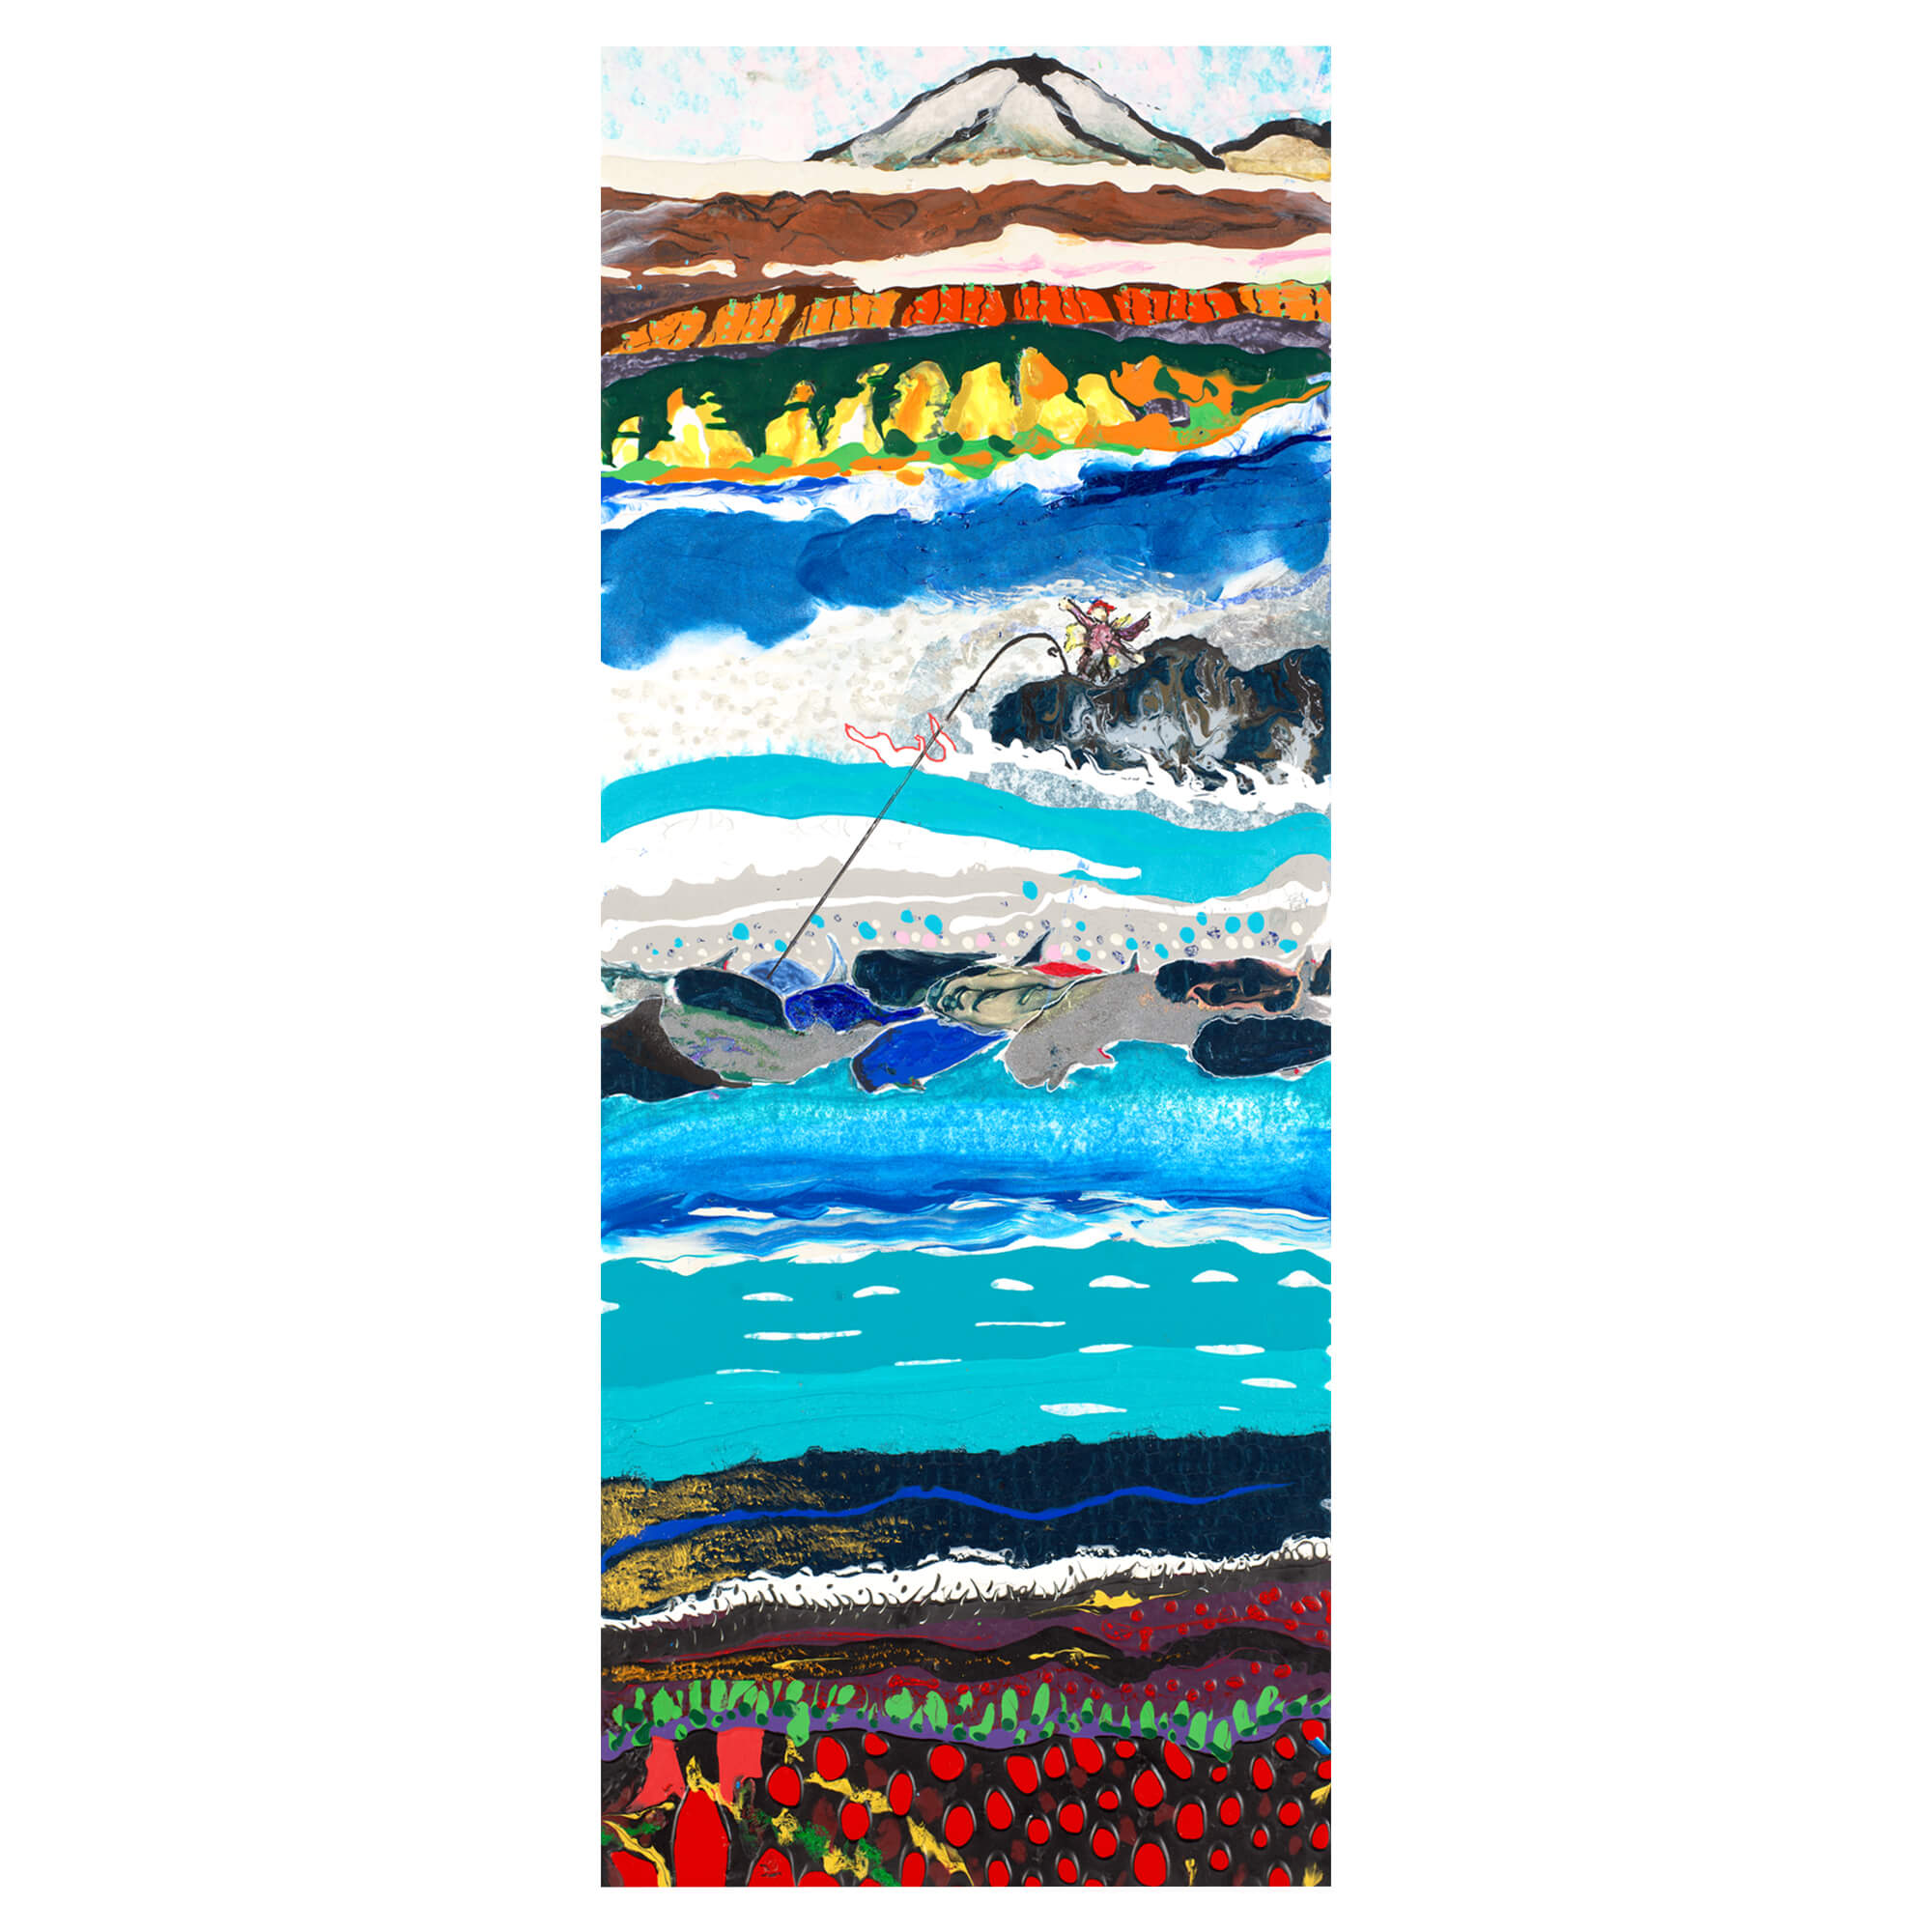 abstract art of the different layers of the ocean by Hawaii artist Robert Hazzard